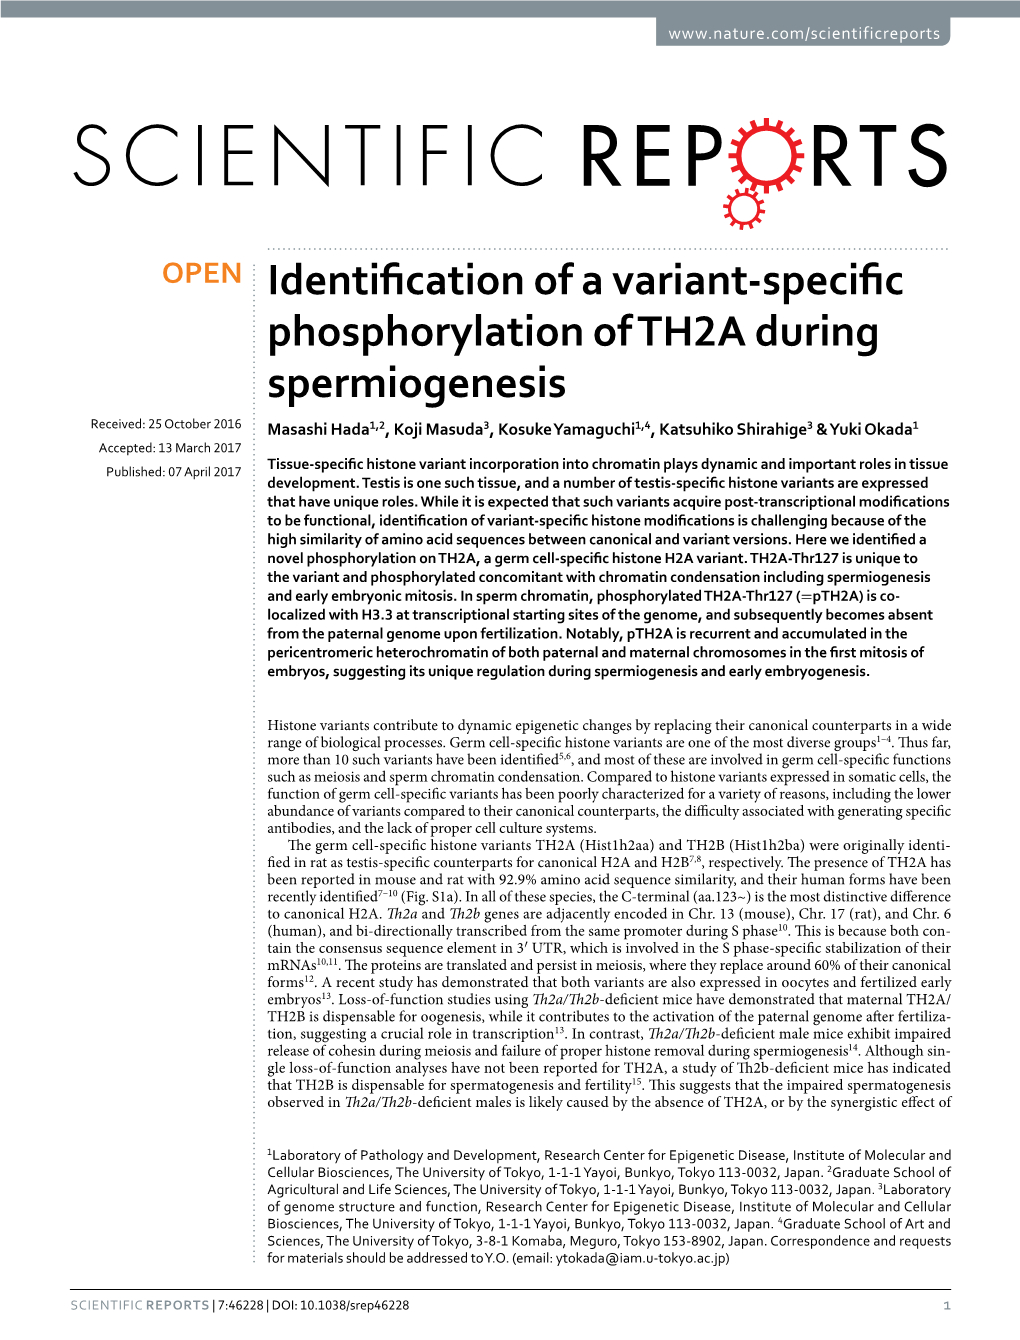 Identification of a Variant-Specific Phosphorylation of TH2A During